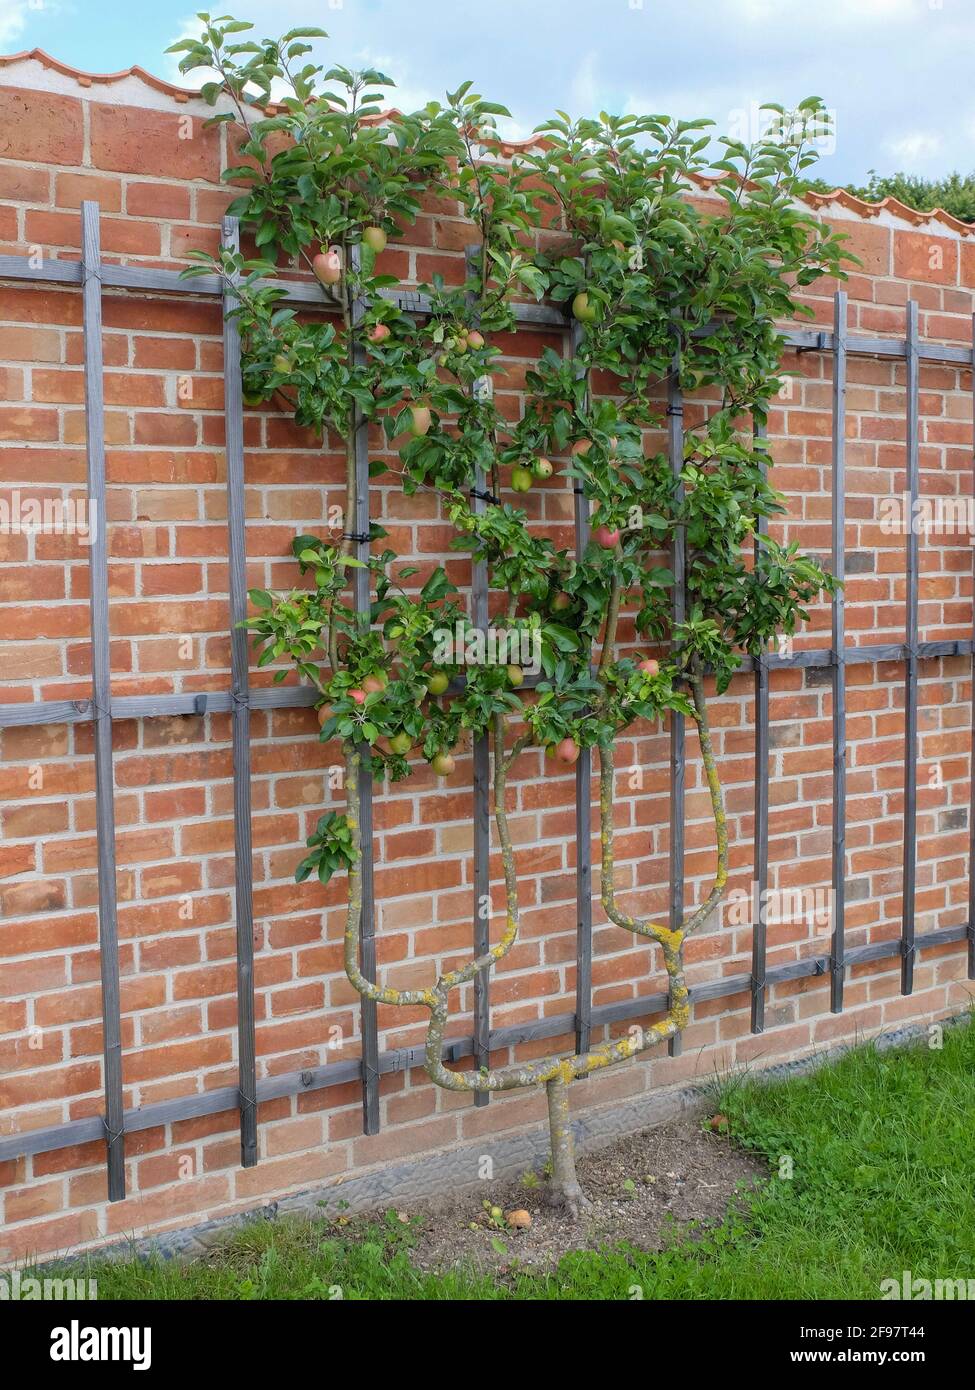 Apple tree 'Prince Albrecht of Prussia' (Malus domestica) on the trellis on the wall Stock Photo